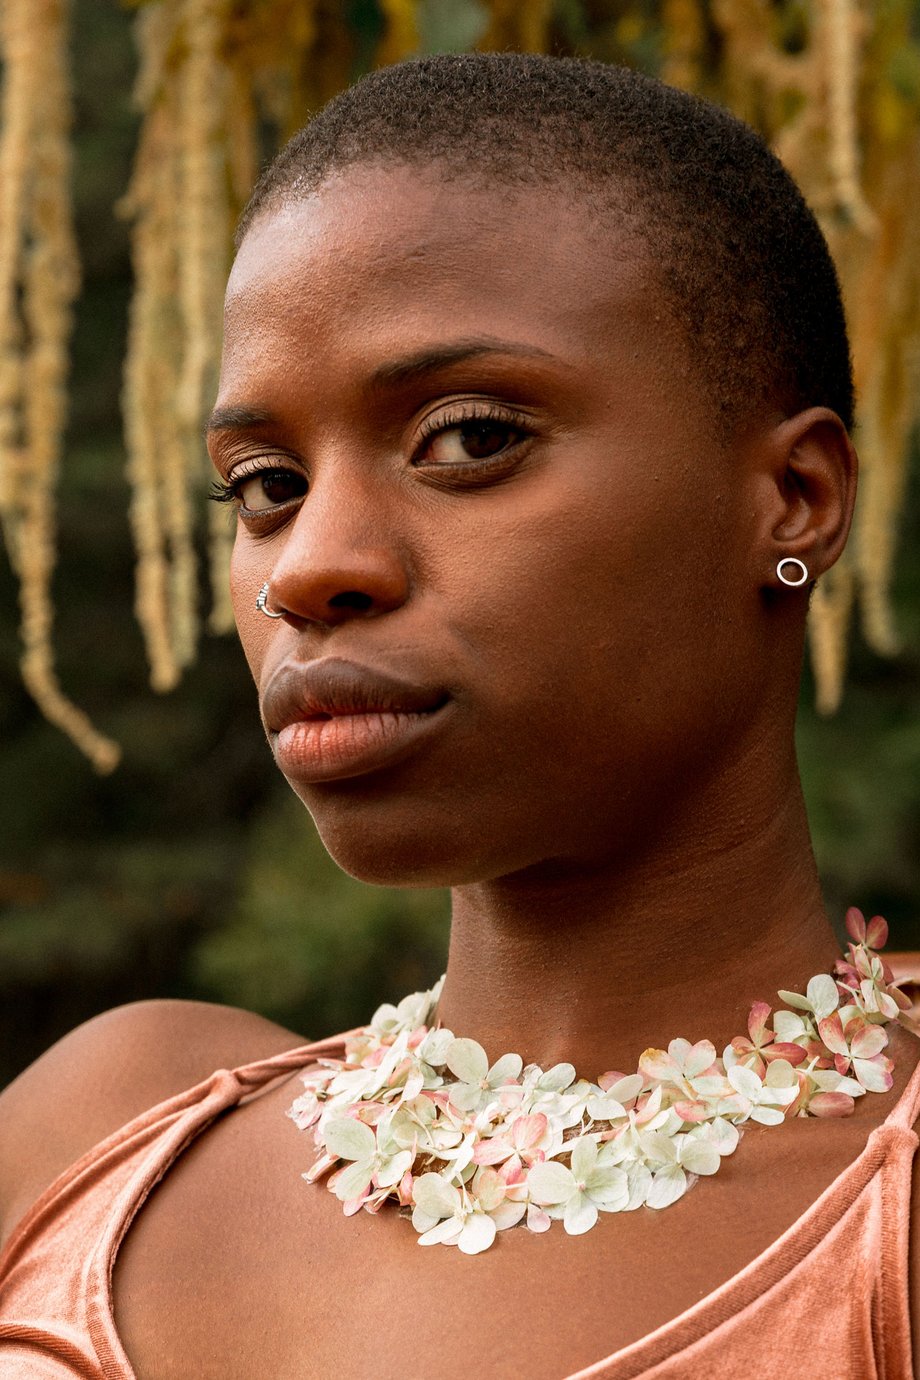 Jesse Cornelius's close up image of a Black woman with flowers for Solmonson Farm